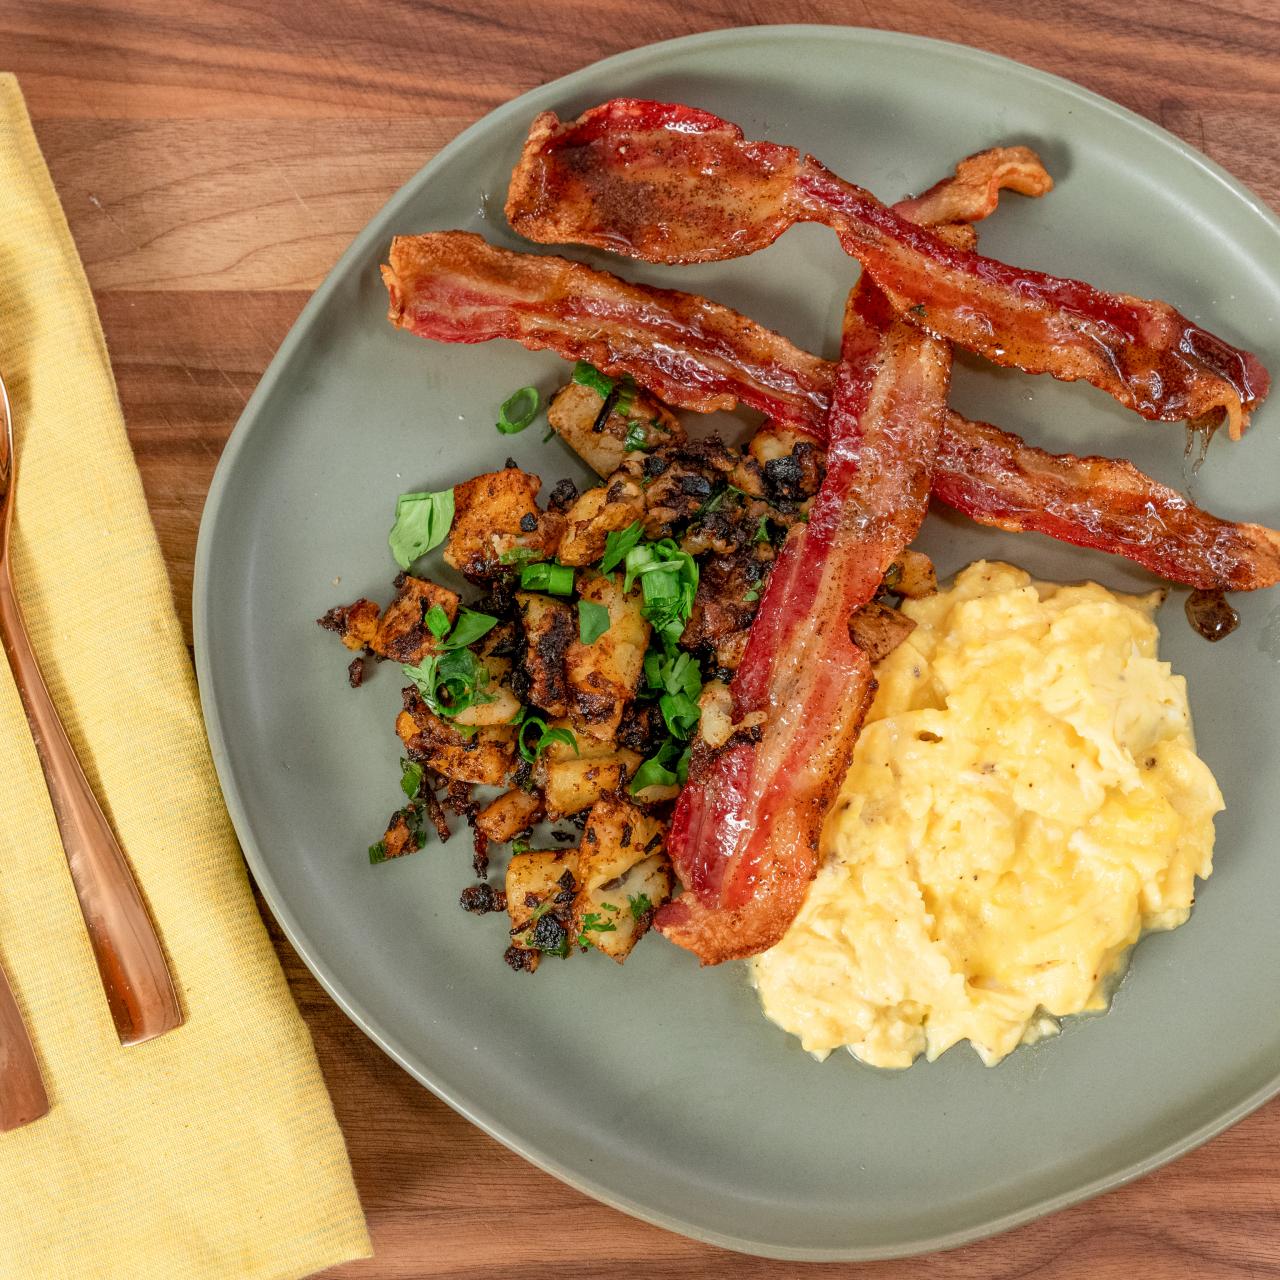 https://food.fnr.sndimg.com/content/dam/images/food/plus/fullset/2020/01/21/0/FN_FNKLive-102719-Perfect-Scrambled-Eggs-with-Spicy-Classic-Home-Fries-and-Glazed-Bacon_s4x3.jpg.rend.hgtvcom.1280.1280.suffix/1579376065273.jpeg